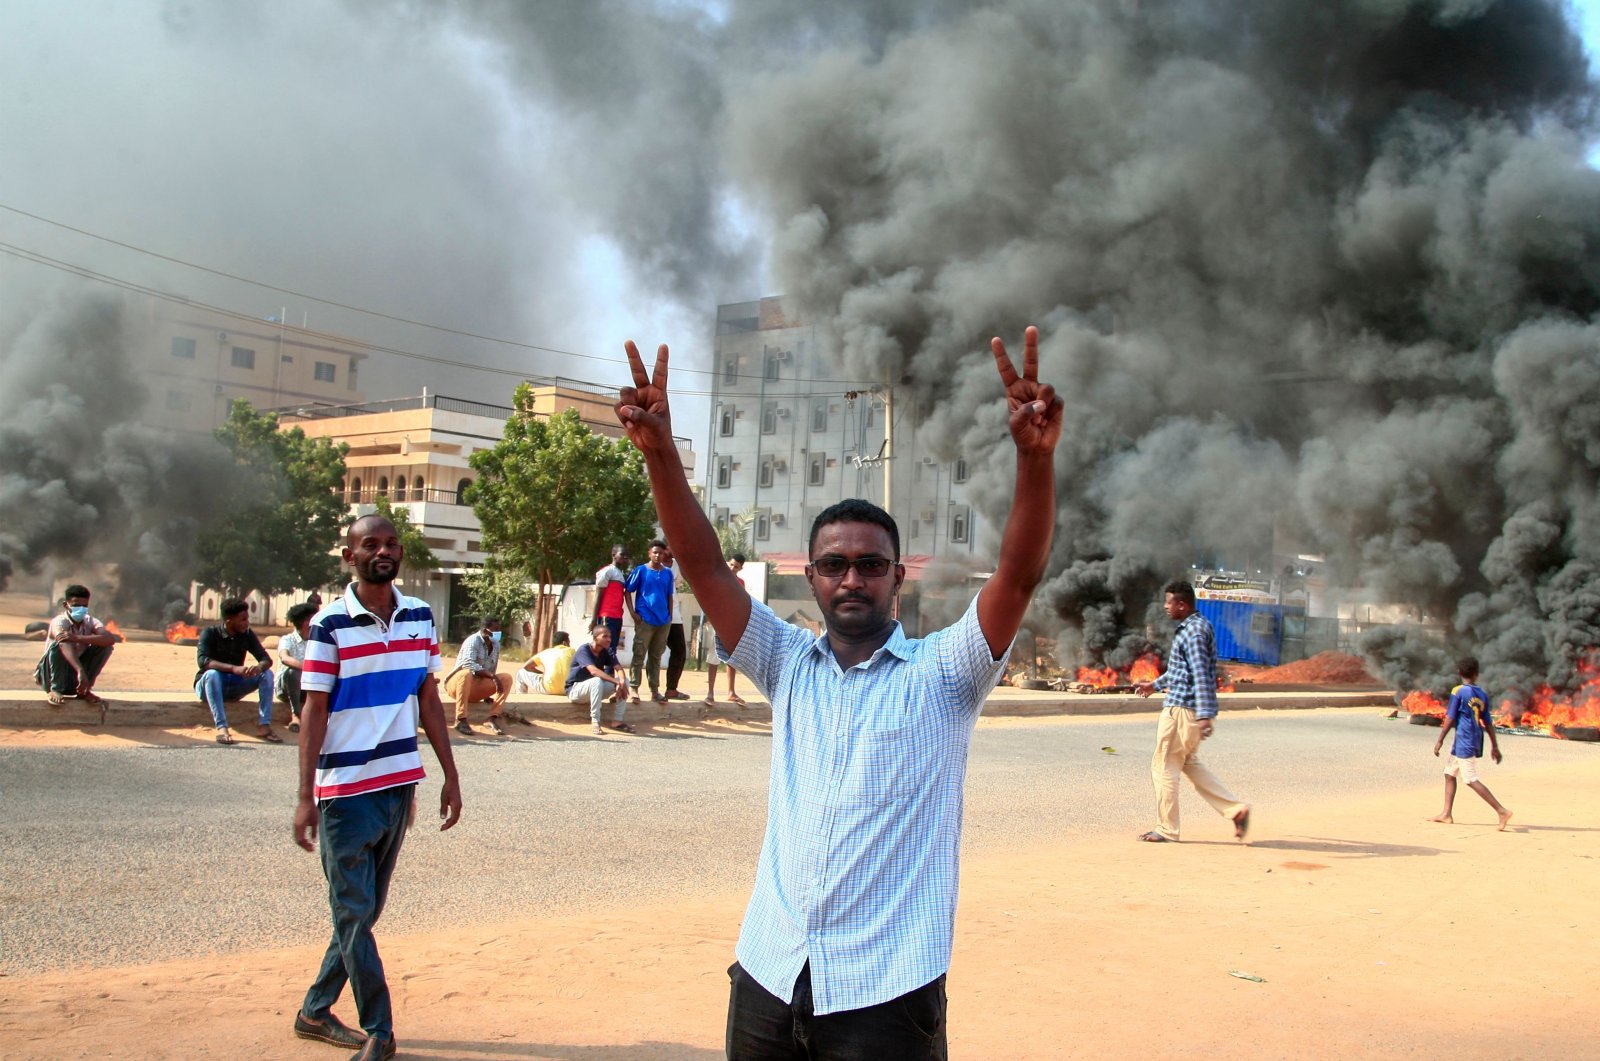 A Sudanese demonstrator flashes the victory sign during a demonstration in the capital Khartoum, on Oct. 25, 2021, to denounce overnight detentions by the army of members of Sudan's government. (AFP Photo)